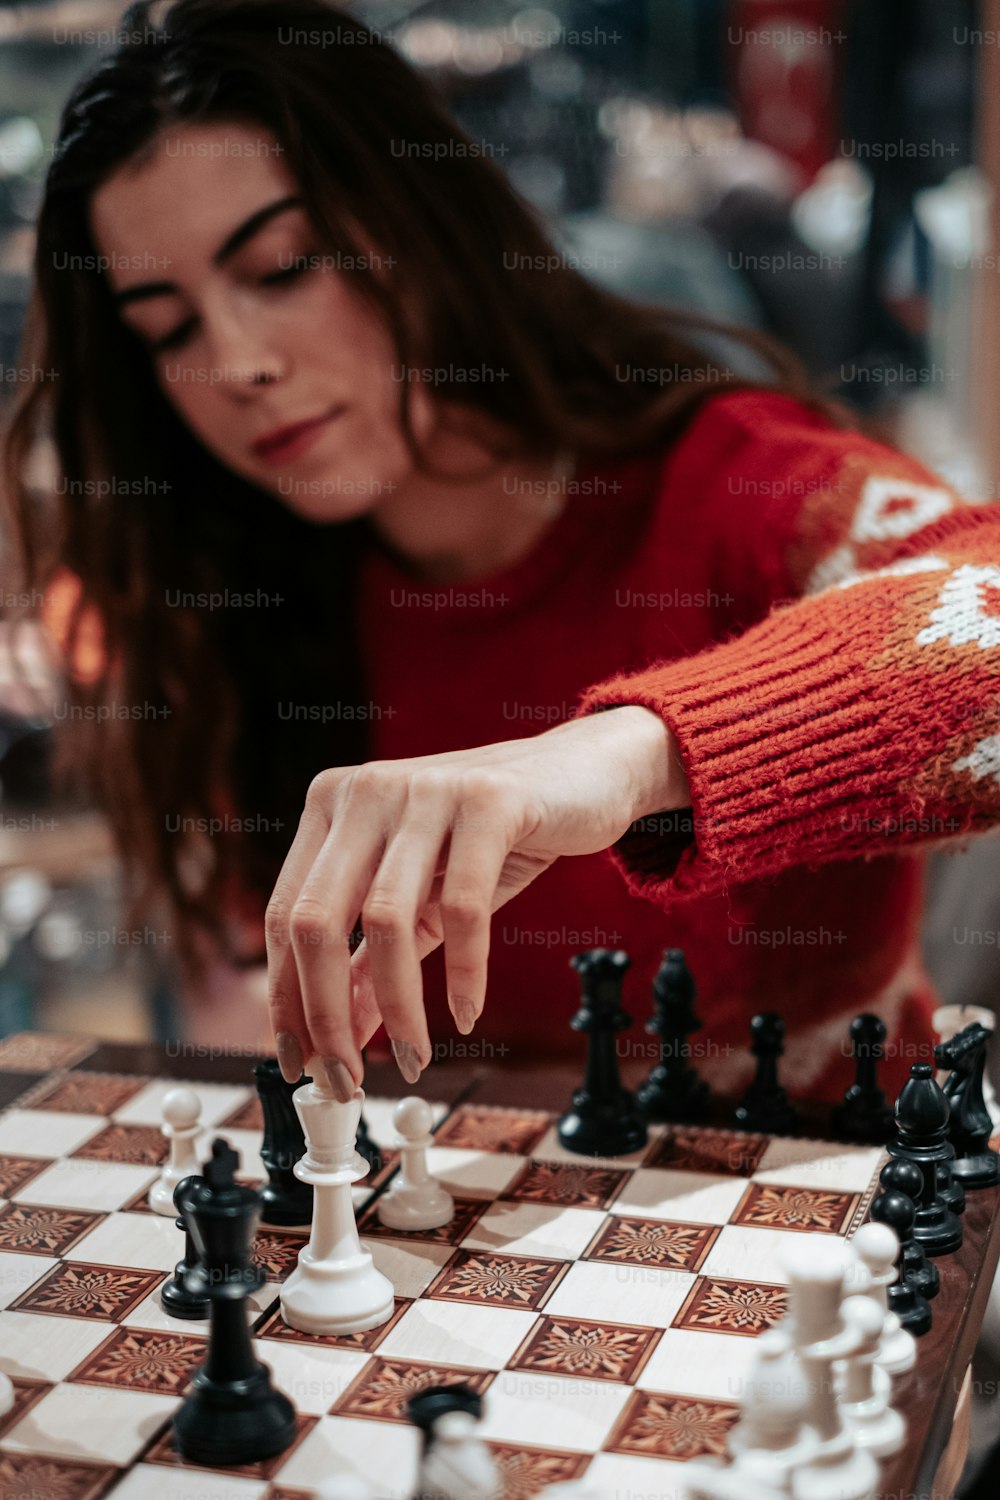 1000+ Chess Board Pictures  Download Free Images on Unsplash